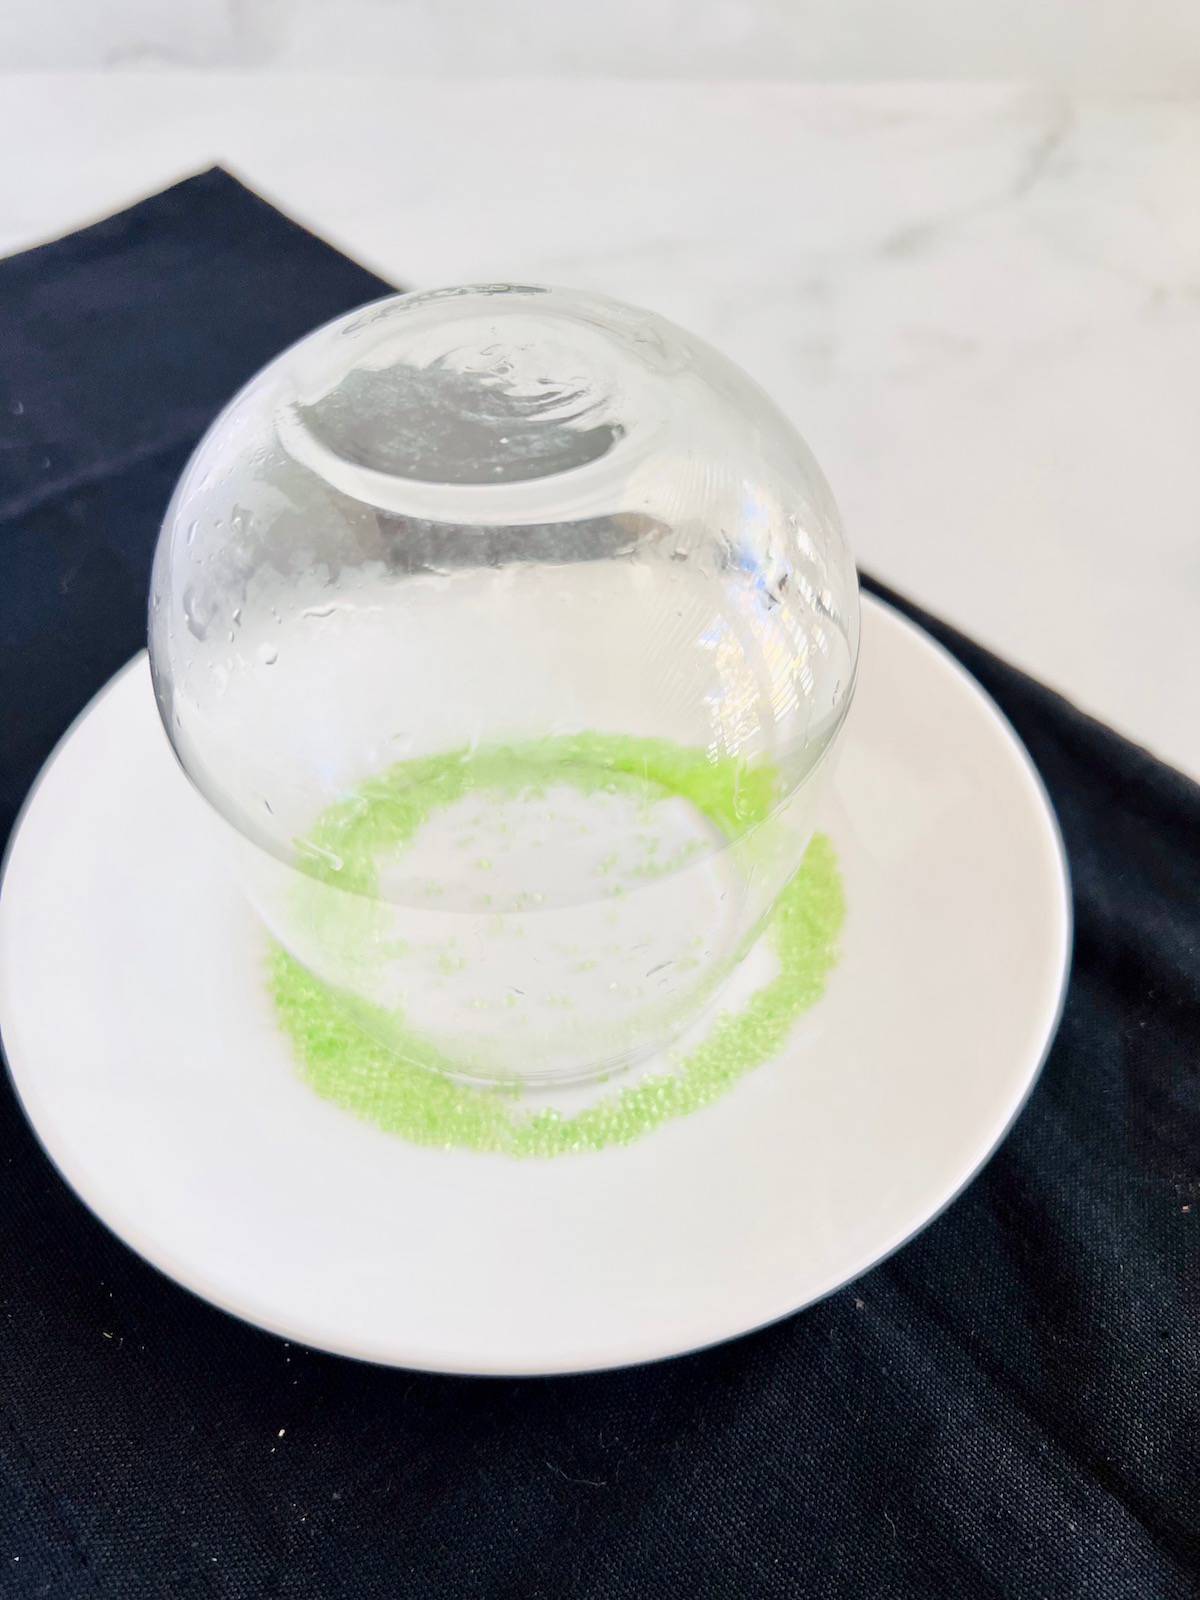 Glass upside down in a dish of green sugar sprinkles.